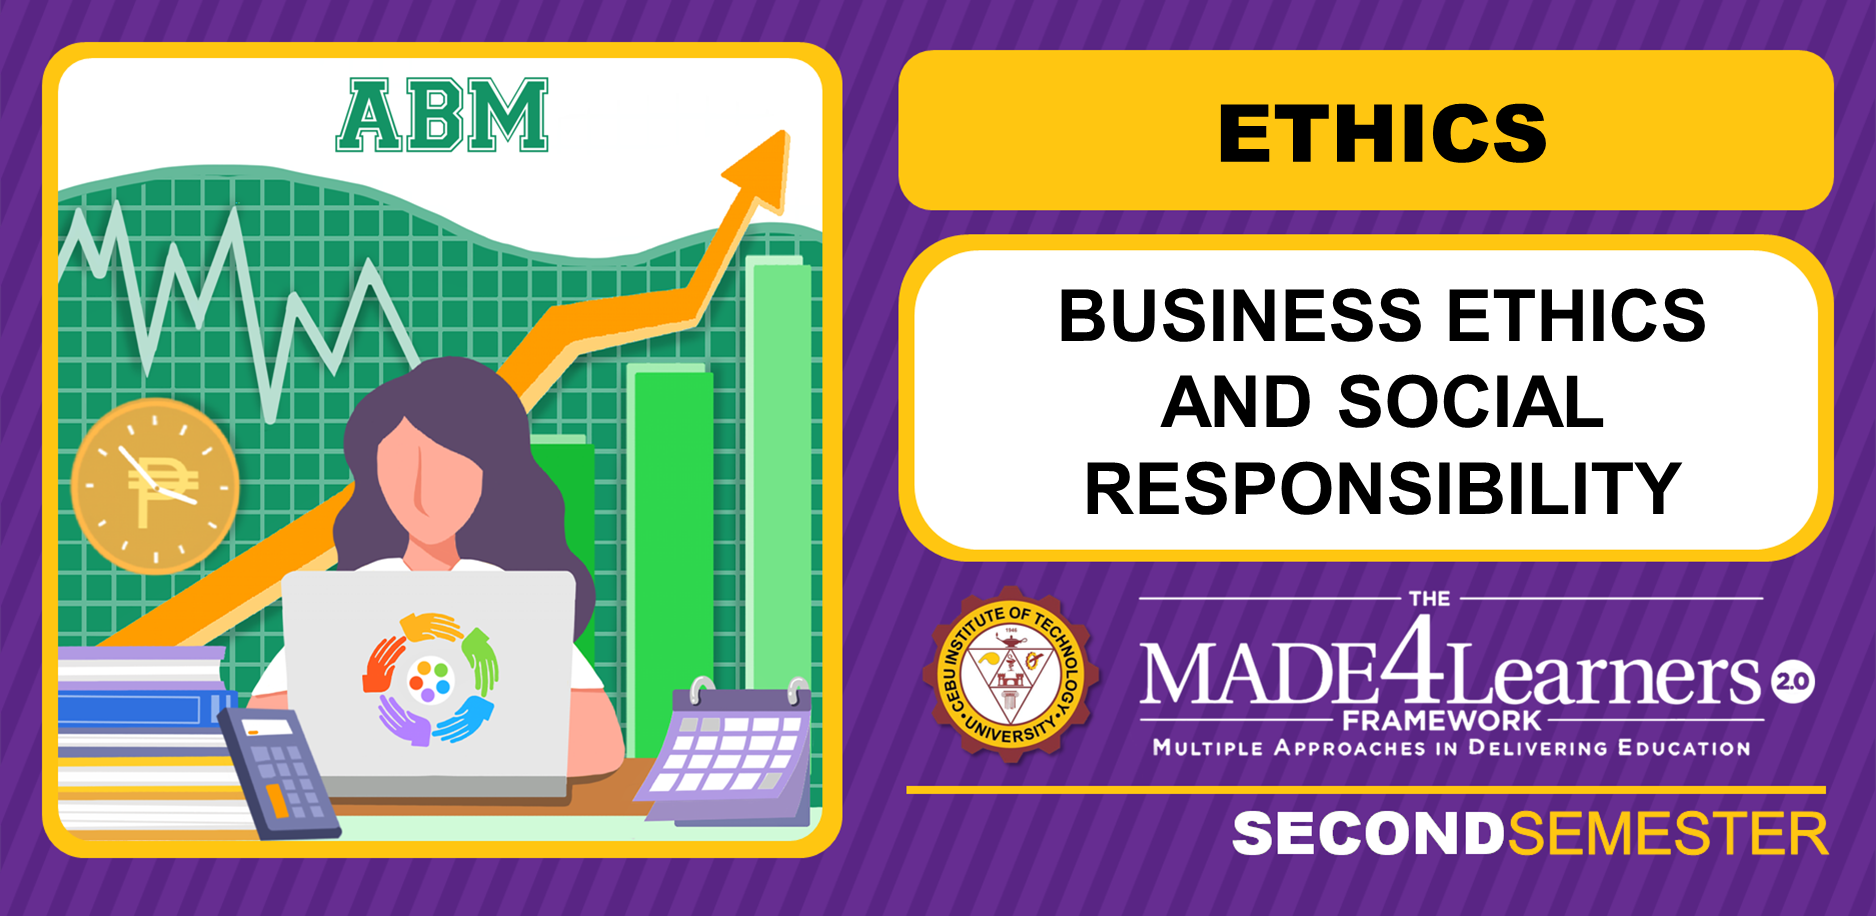 ETHICS: Business Ethics and Social Responsibility